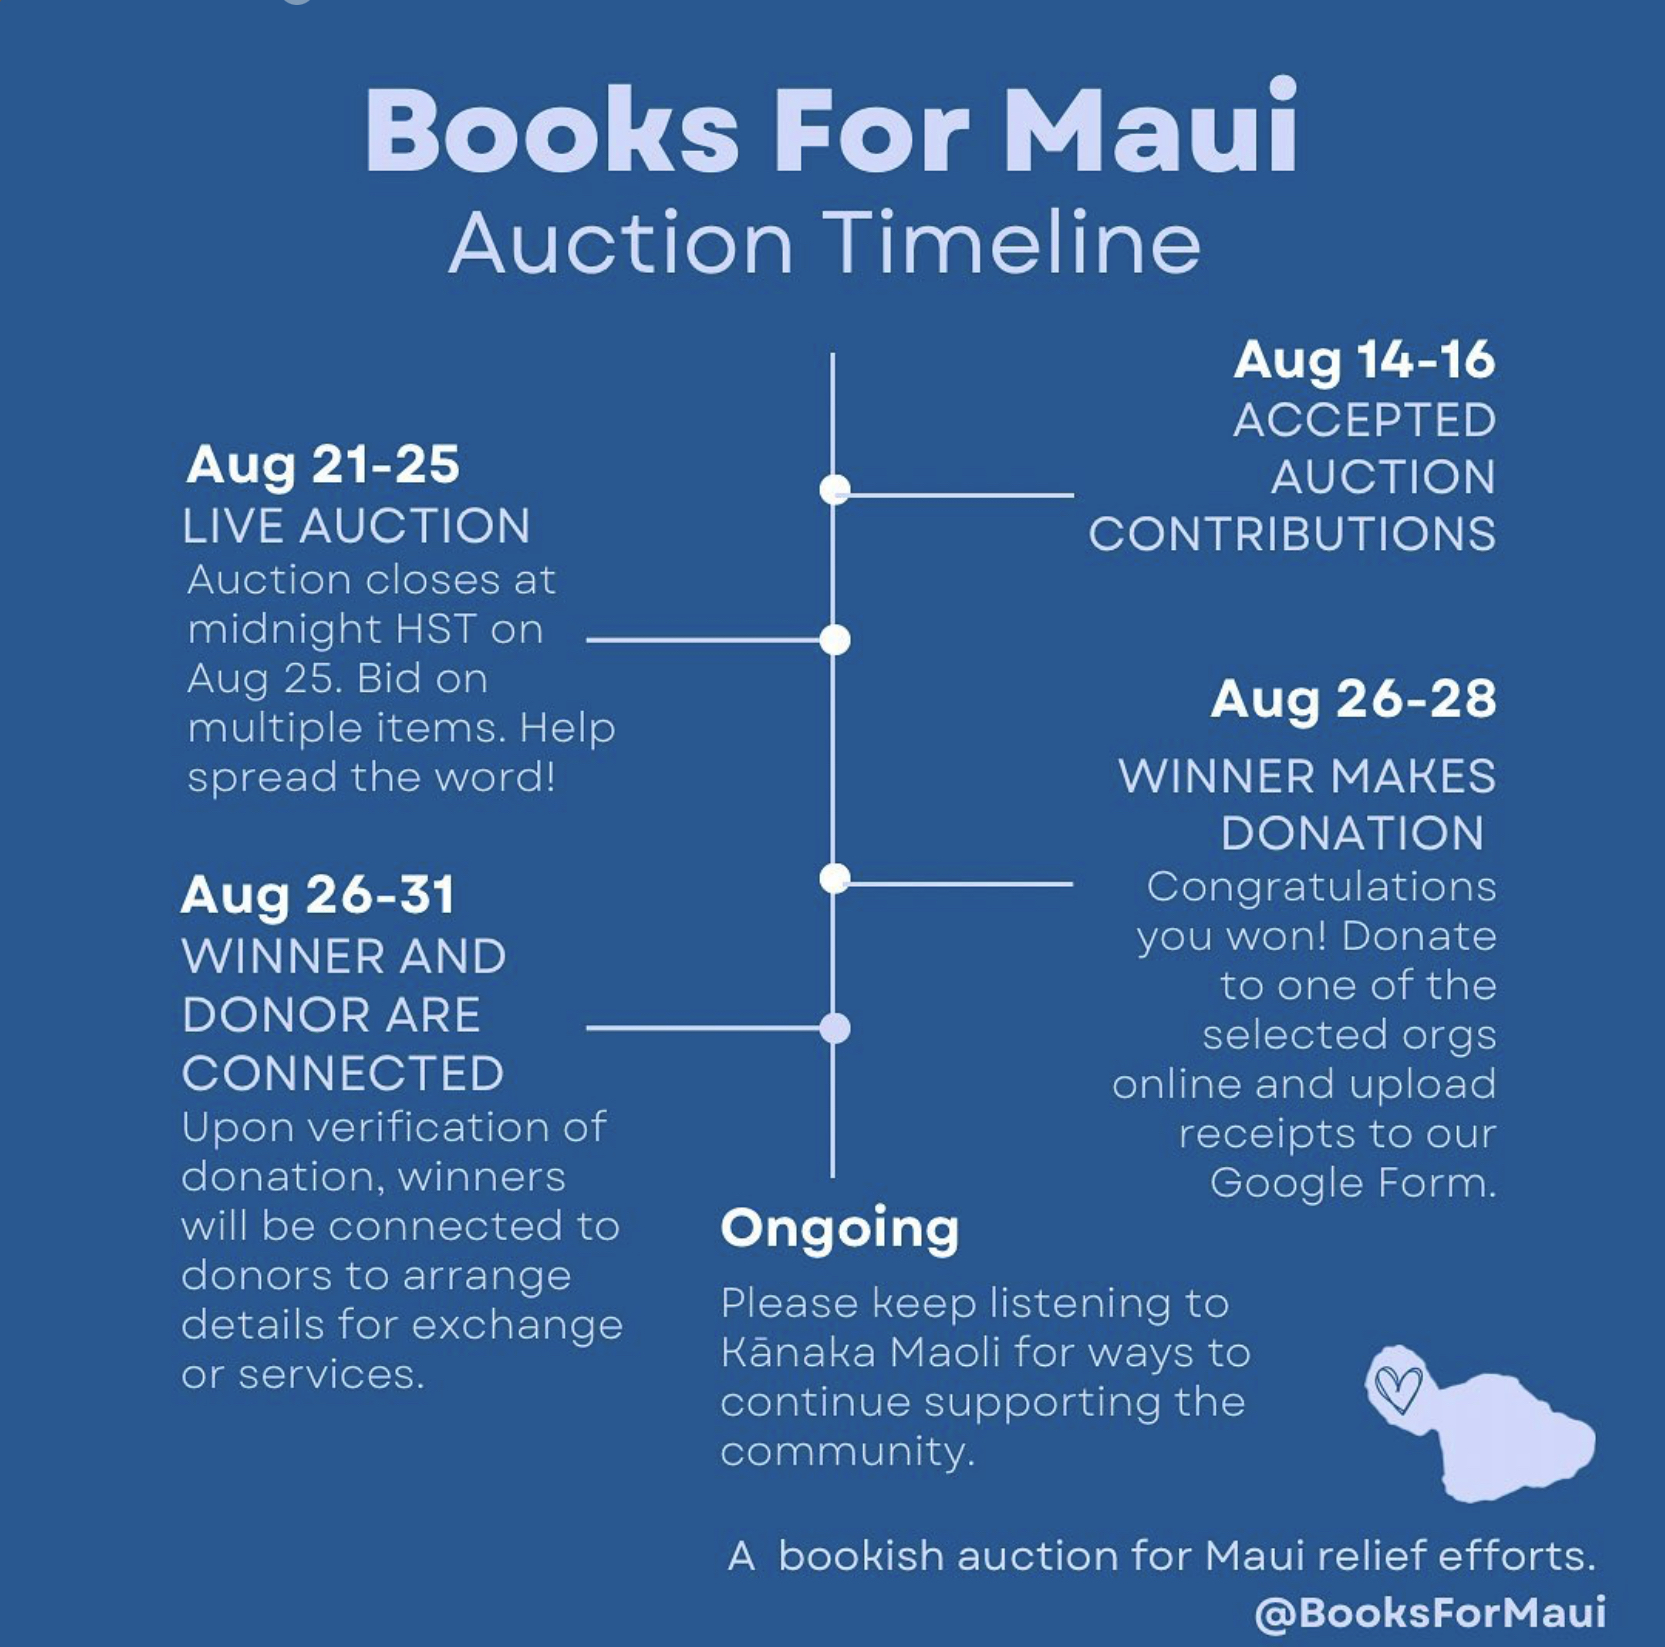 Books for Maui benefit auction timeline: August 21-25: Live auction August 26-28: Winner makes donation August 26-31: Winner and Donor are connected Ongoing: Please keep listening to Kanaka Maoli for ways to continue supporting the community